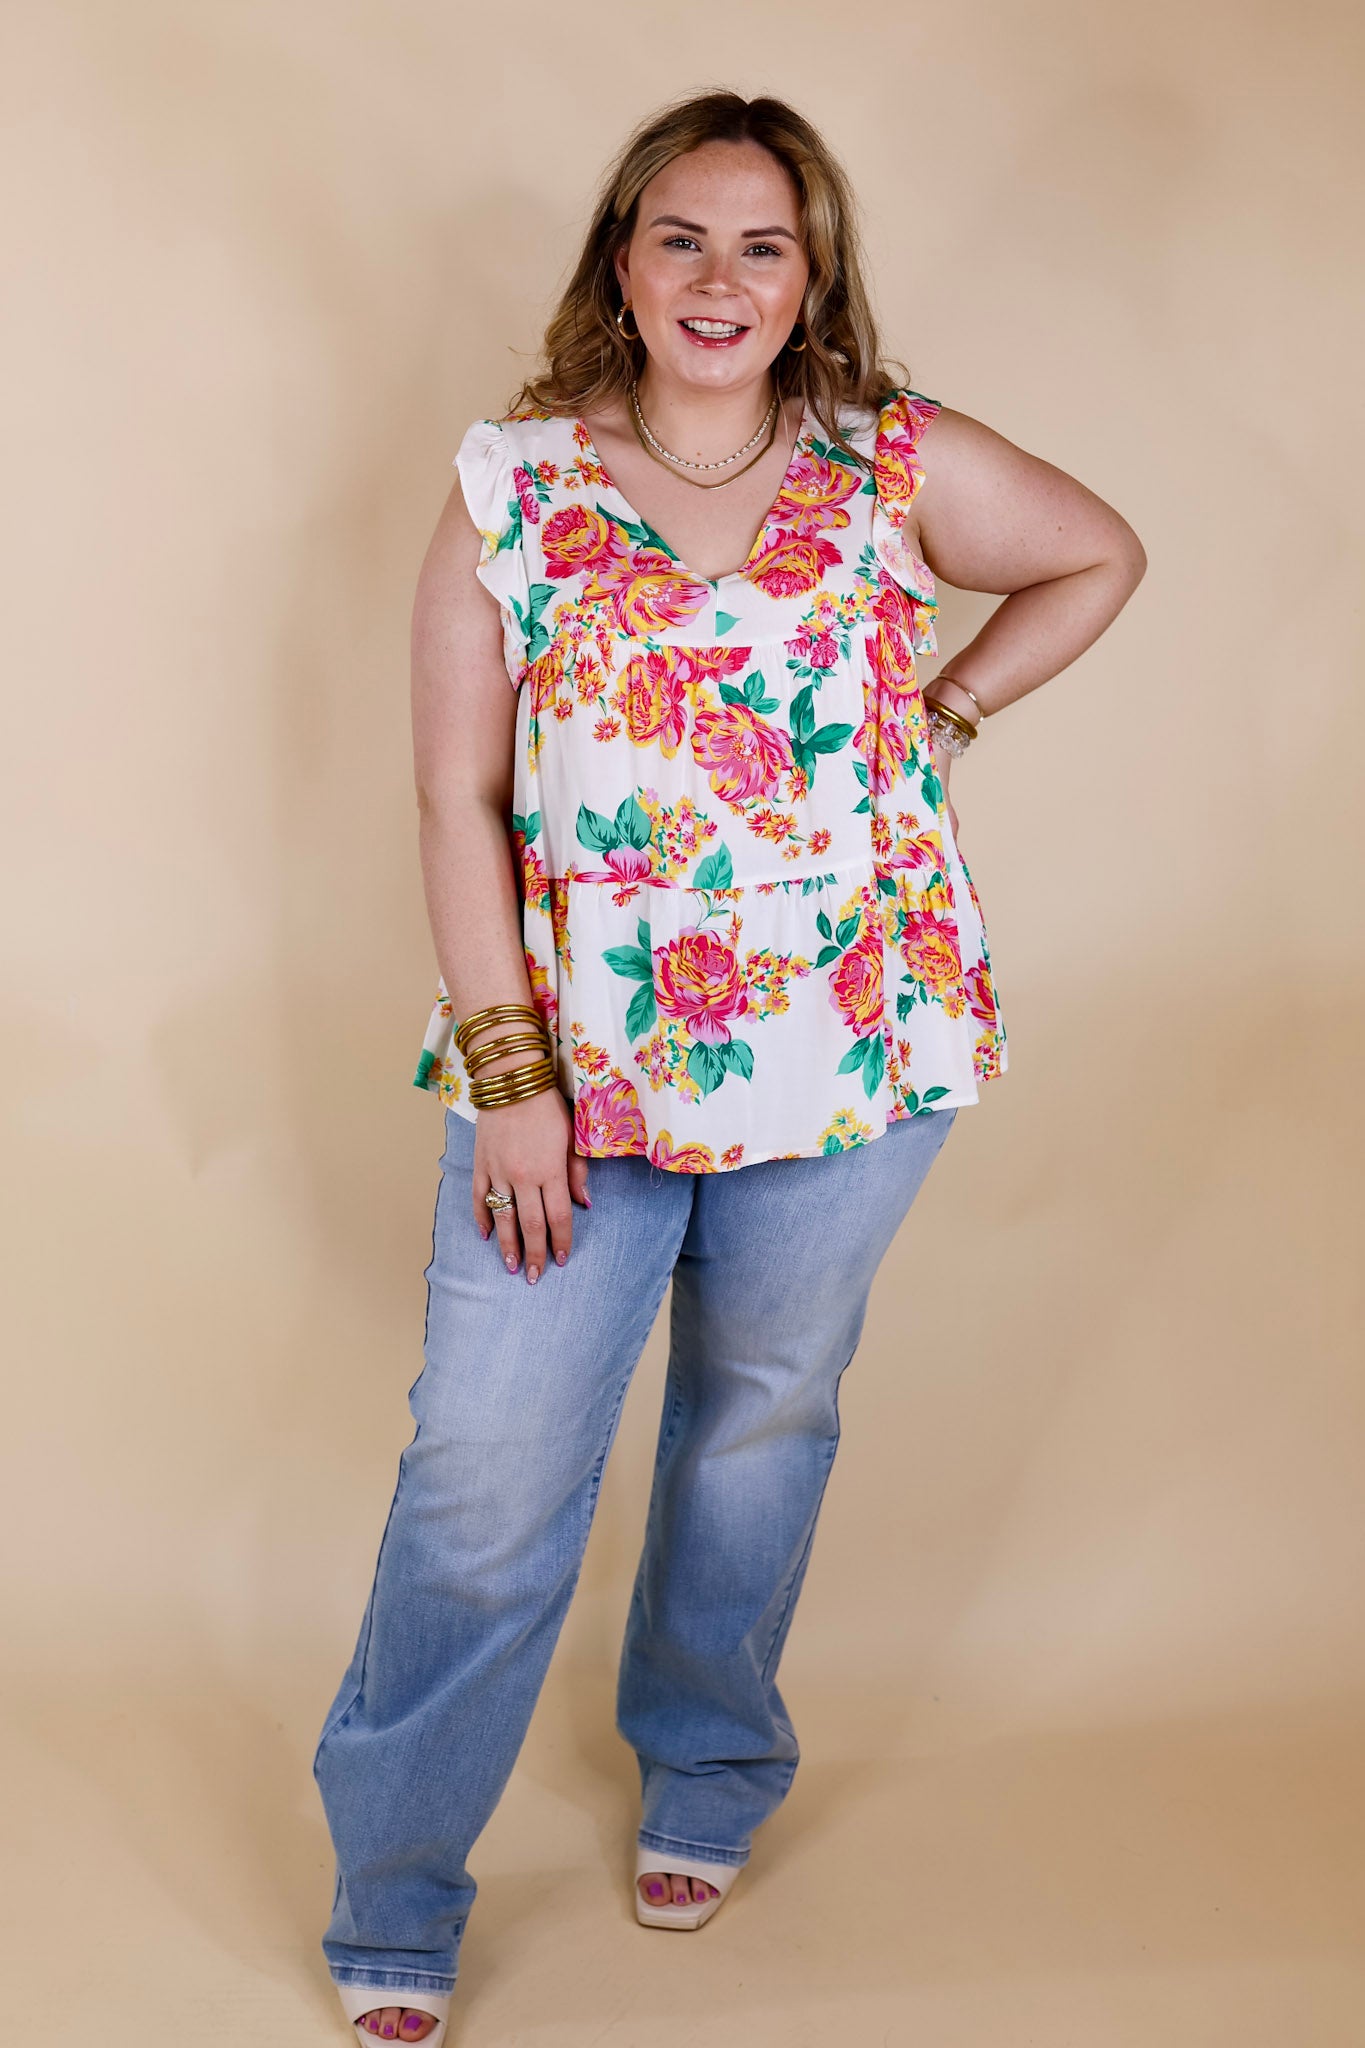 Inspiring Sights Floral V Neck Top with Ruffle Cap Sleeves in White - Giddy Up Glamour Boutique